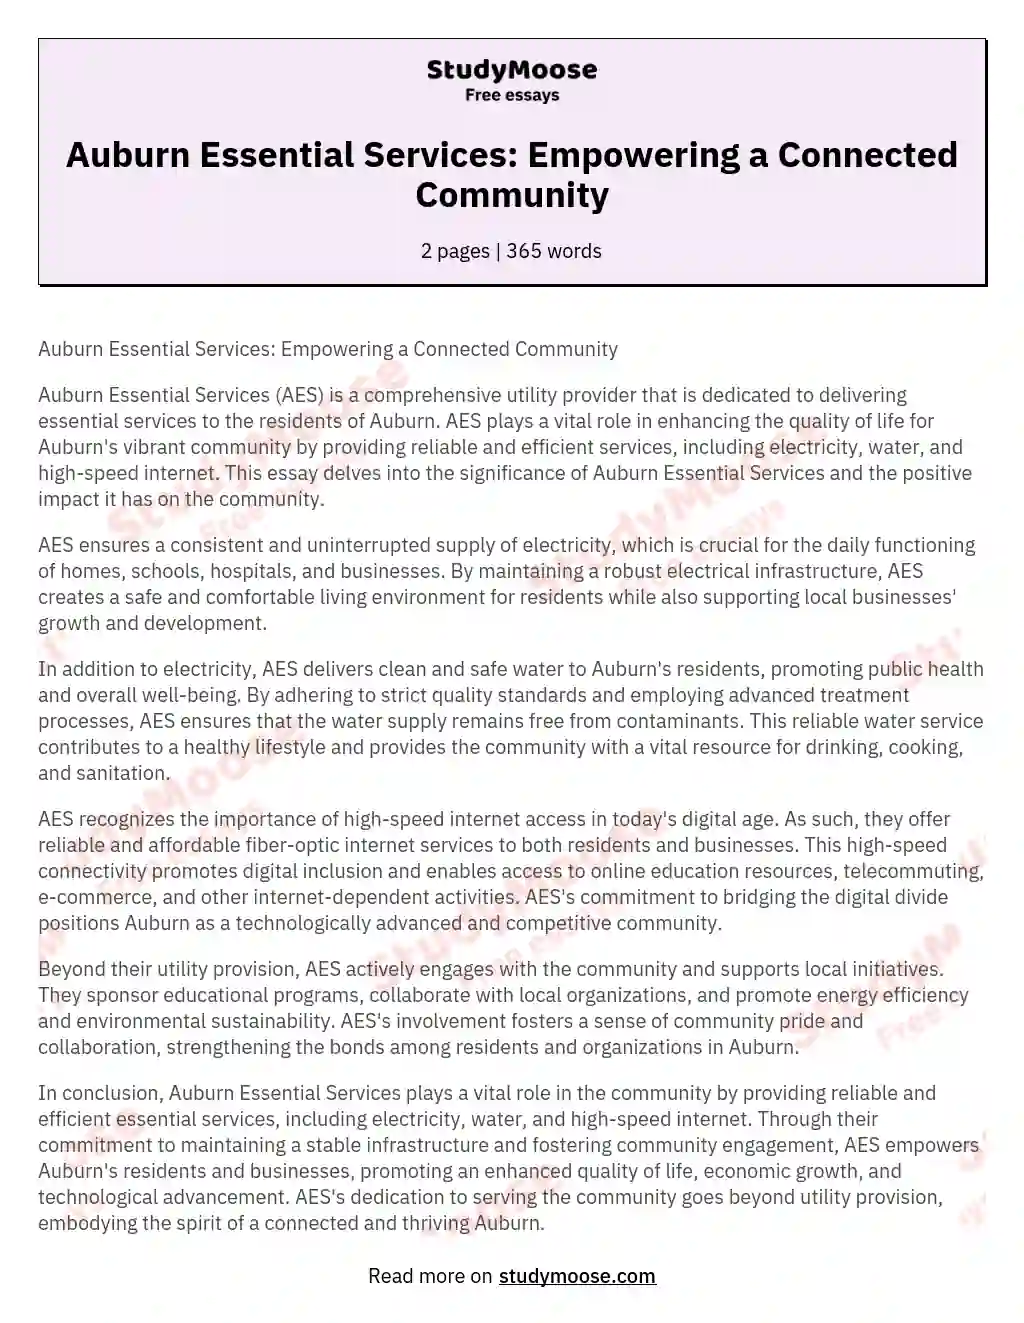 Auburn Essential Services: Empowering a Connected Community essay